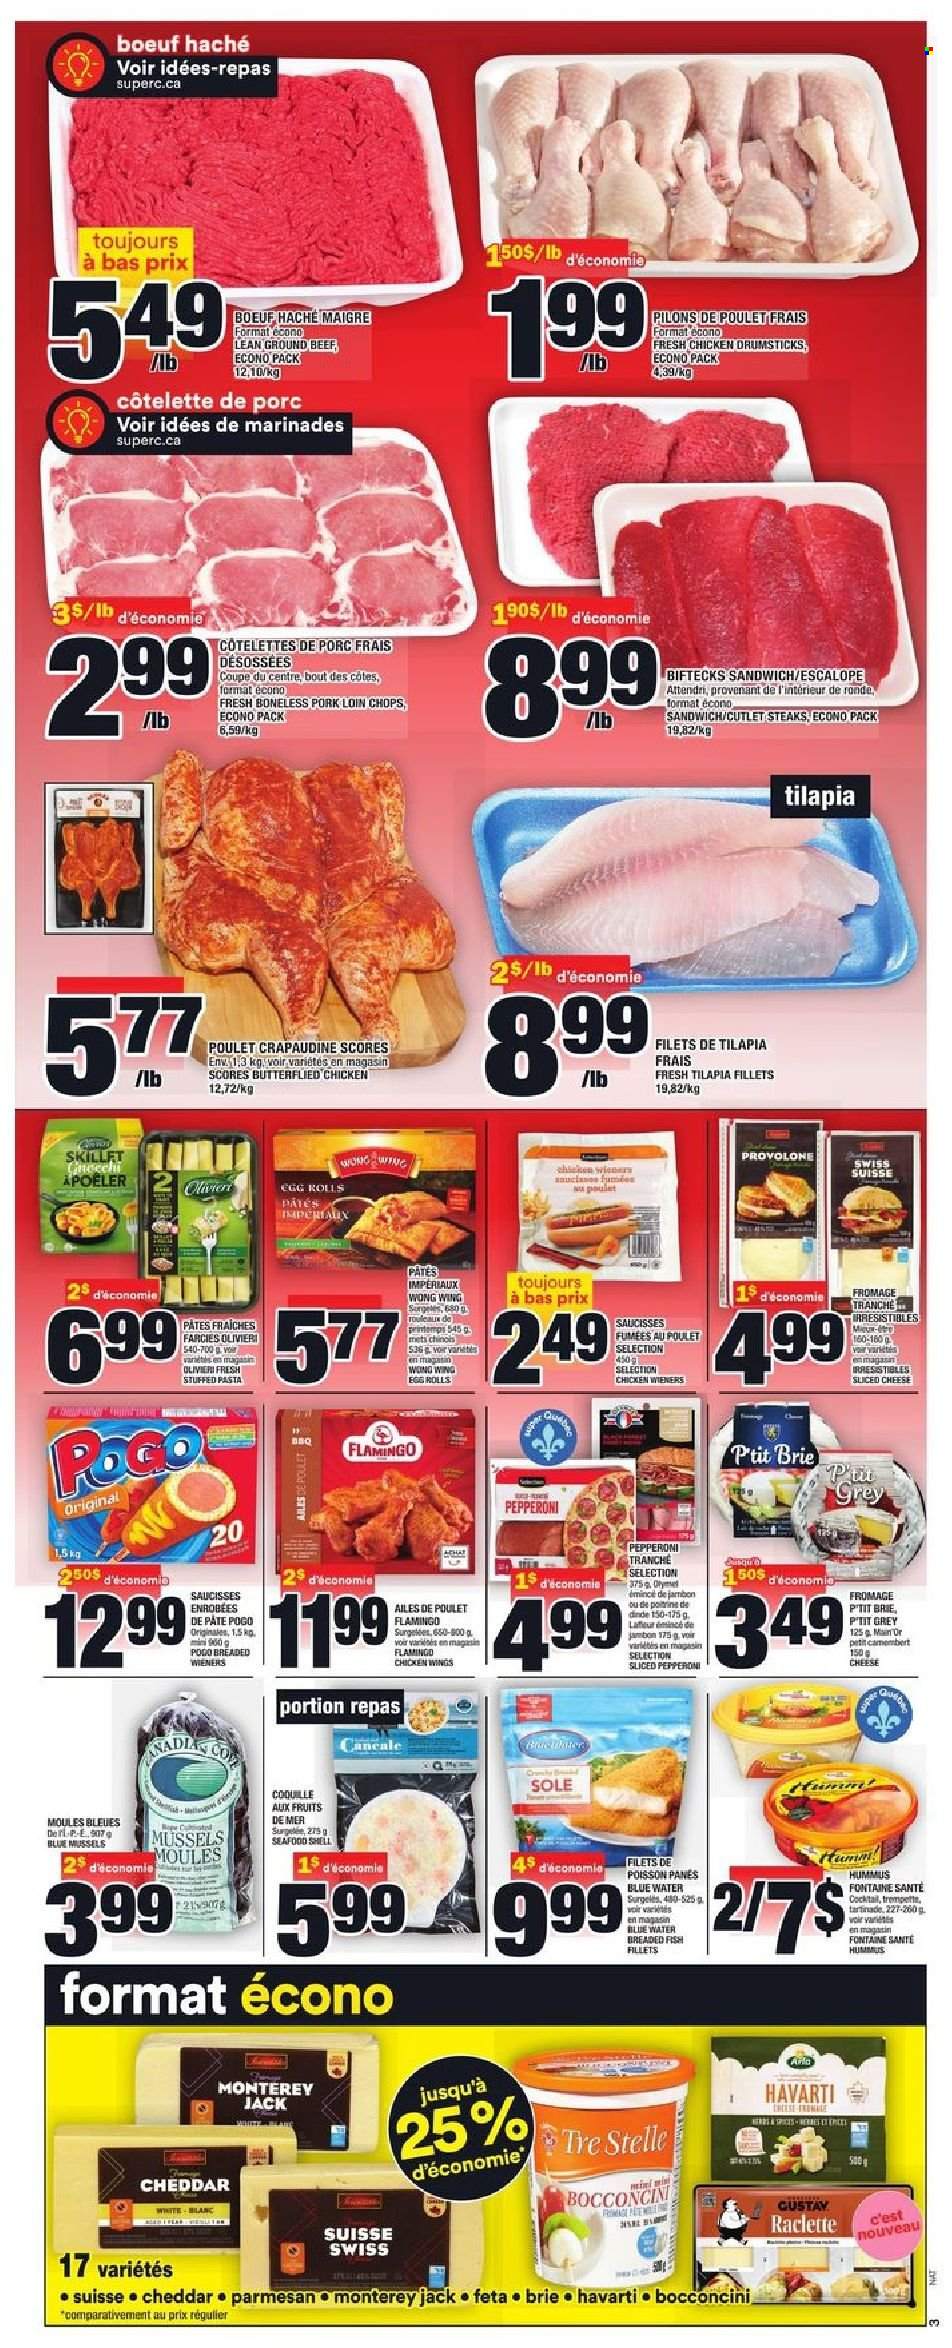 thumbnail - Super C Flyer - October 14, 2021 - October 20, 2021 - Sales products - mussels, tilapia, fish, sandwich, pasta, egg rolls, breaded fish, pepperoni, hummus, bocconcini, Monterey Jack cheese, raclette cheese, sliced cheese, Havarti, cheddar, parmesan, cheese, brie, feta, Provolone, chicken wings, chicken drumsticks, chicken, beef meat, ground beef, pork chops, pork loin, pork meat, steak. Page 4.